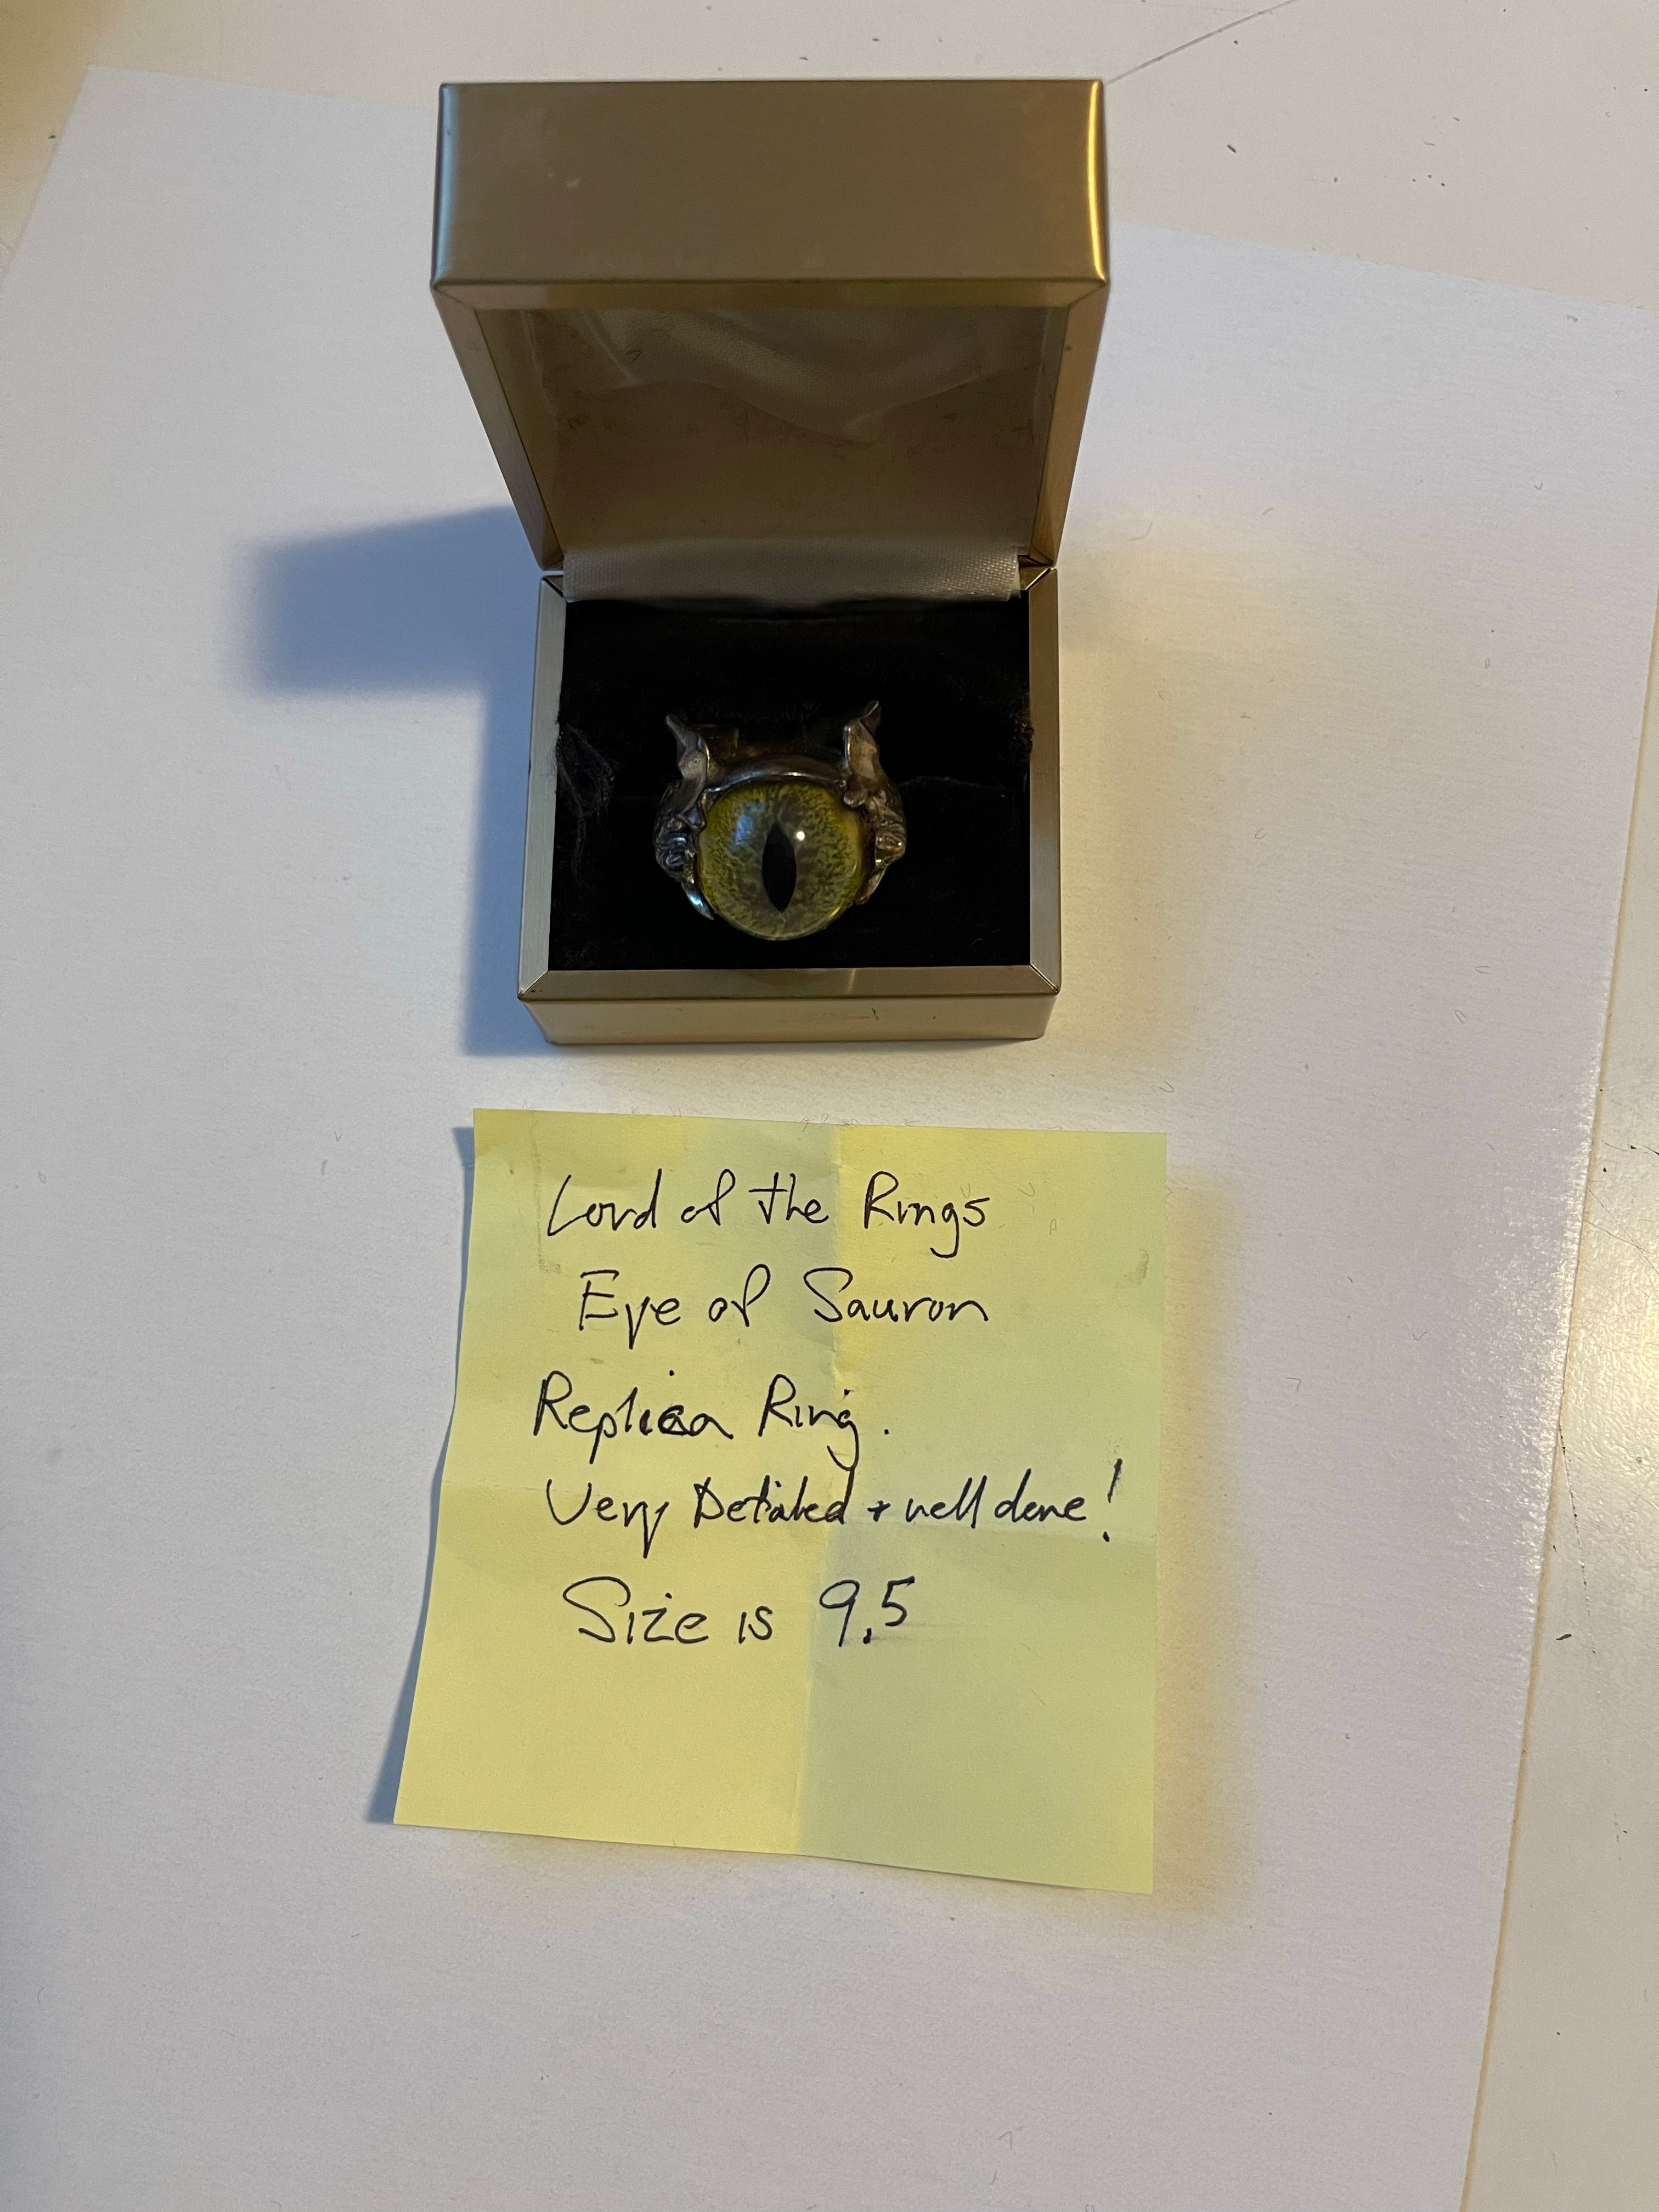 Lord of the Rings Eye of Sauron 9.5 size ring with box